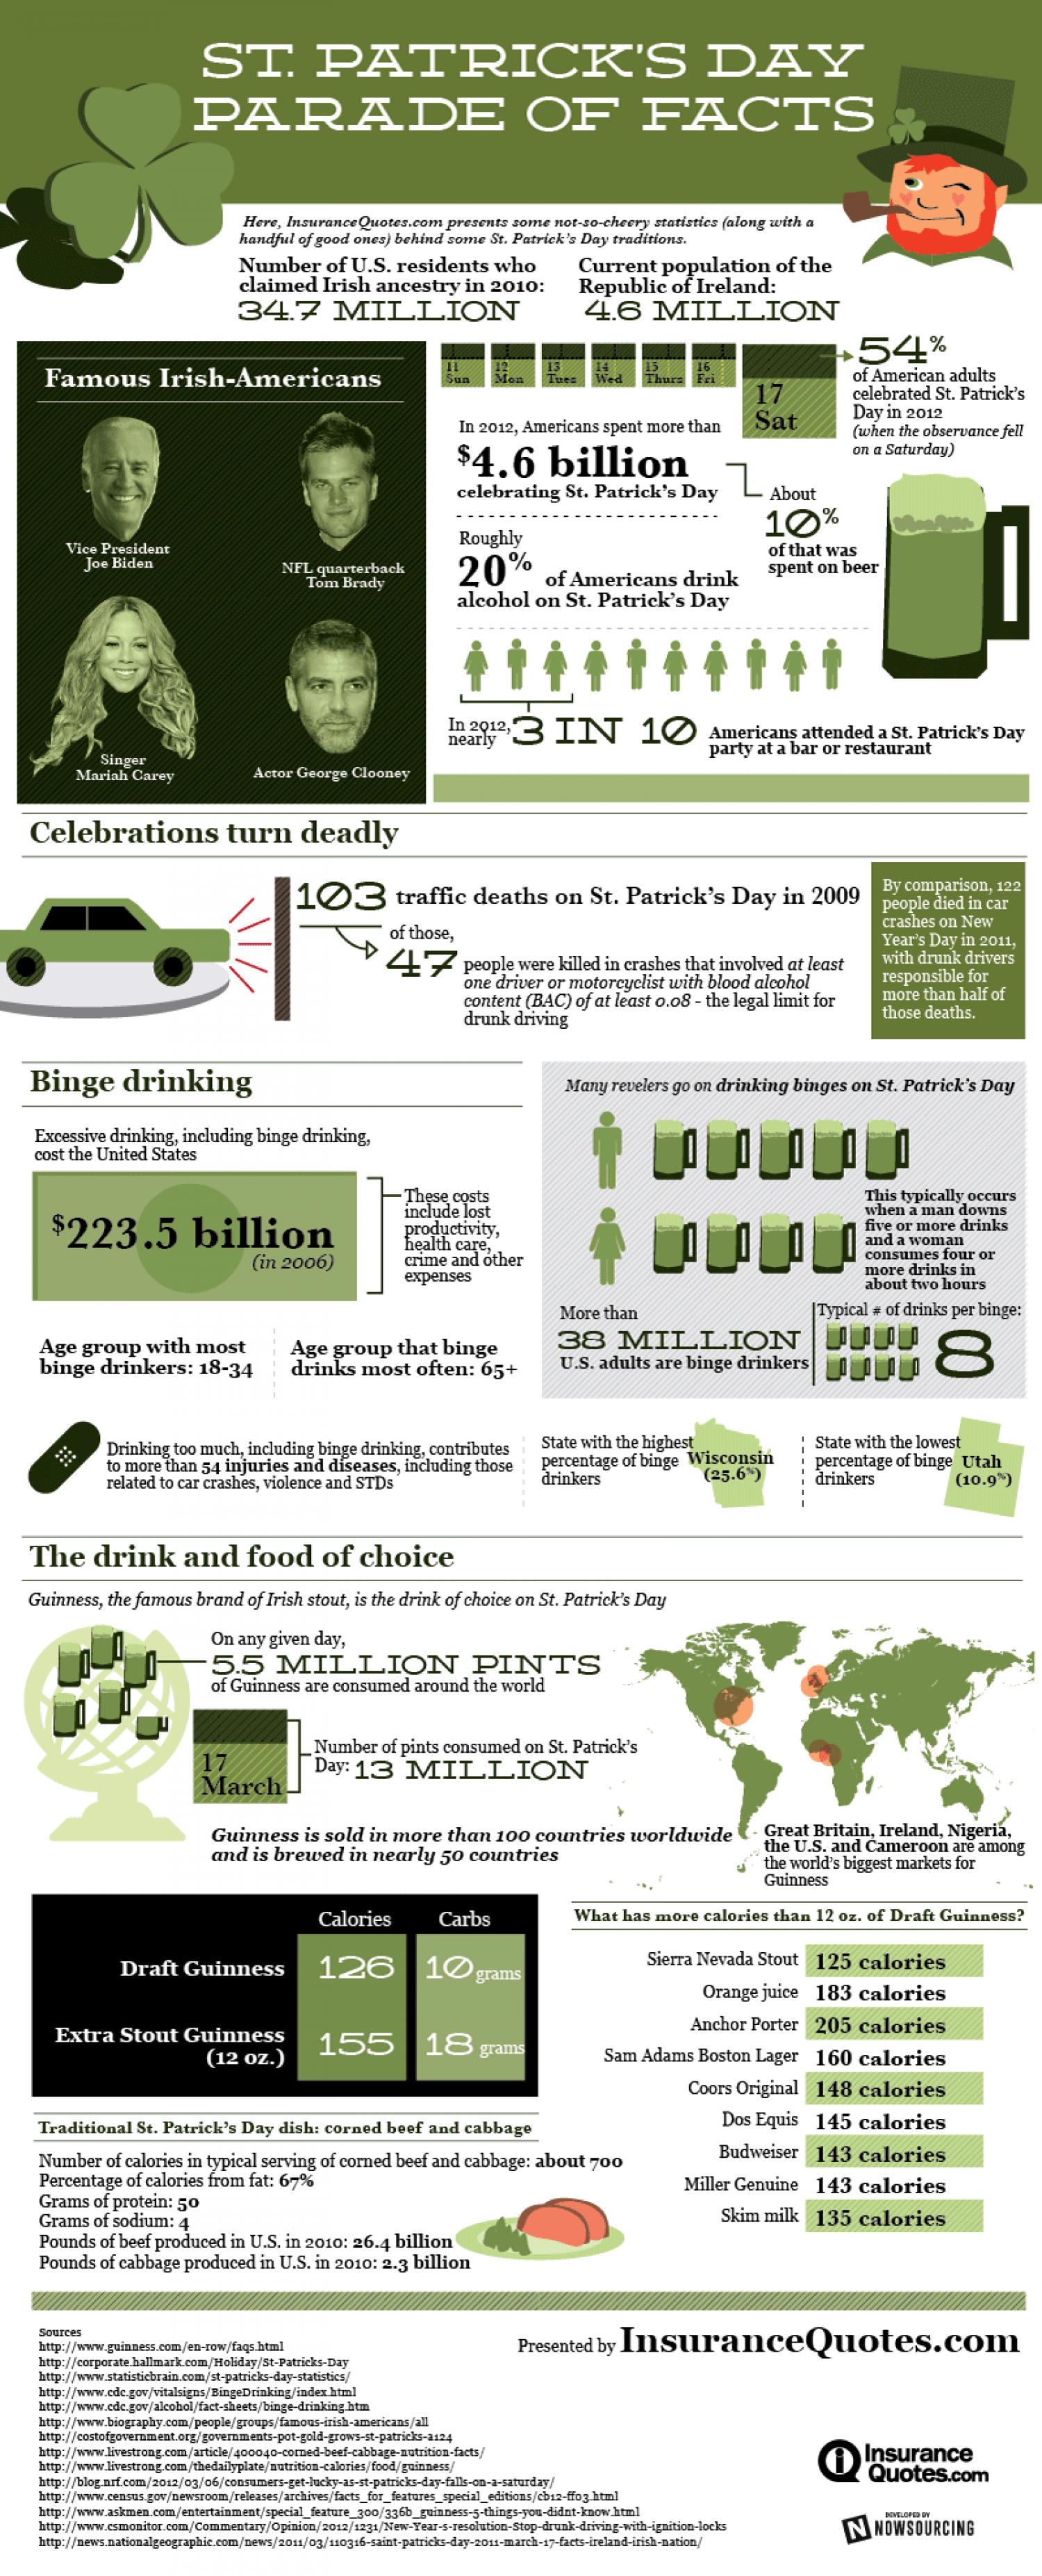 St. Patrick's Day Parade of Facts Infographic